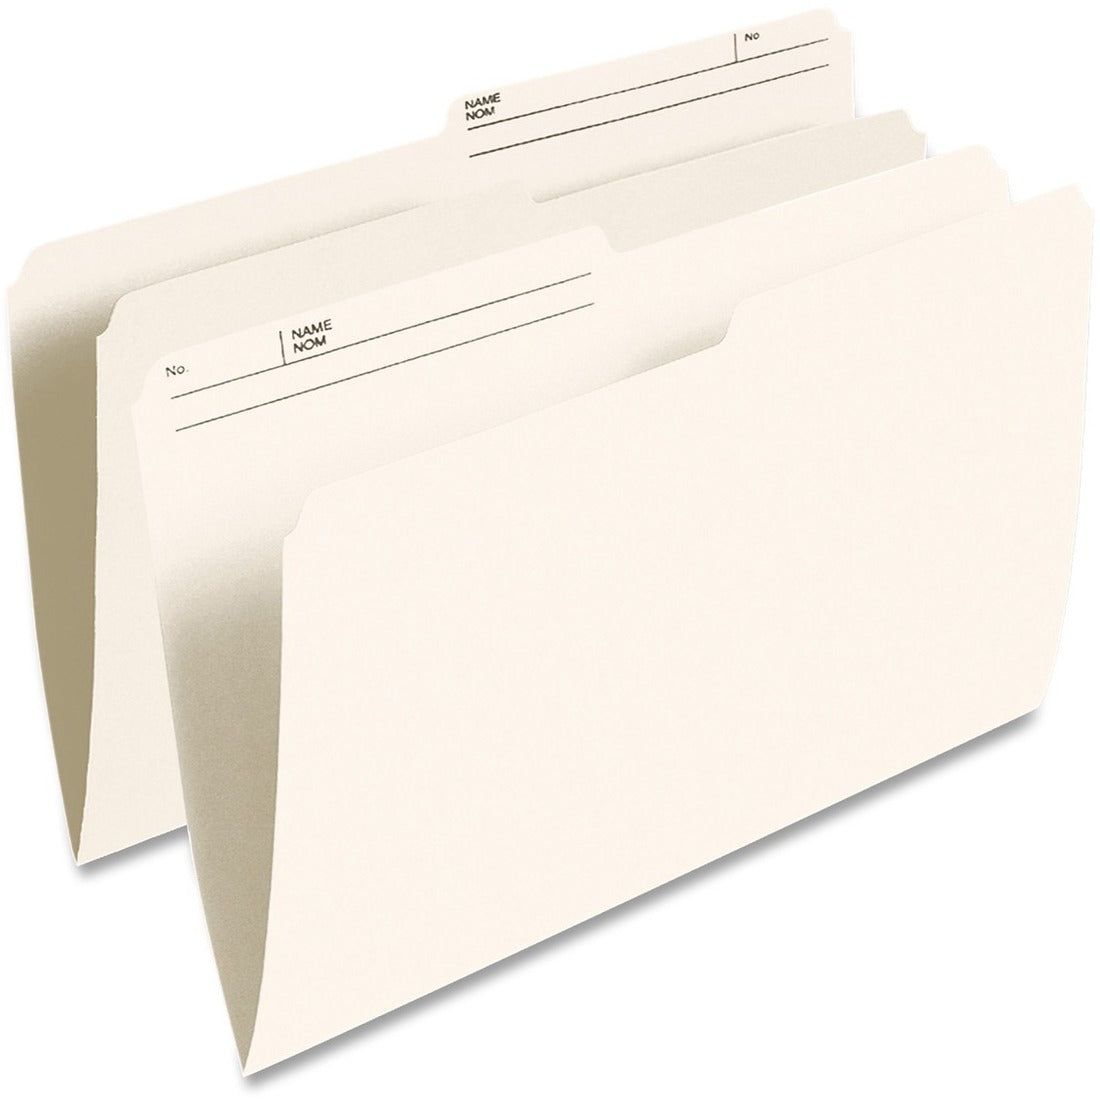 Pendaflex Recycled Top Tab File Folder -  60% Recycled - 100 / Box